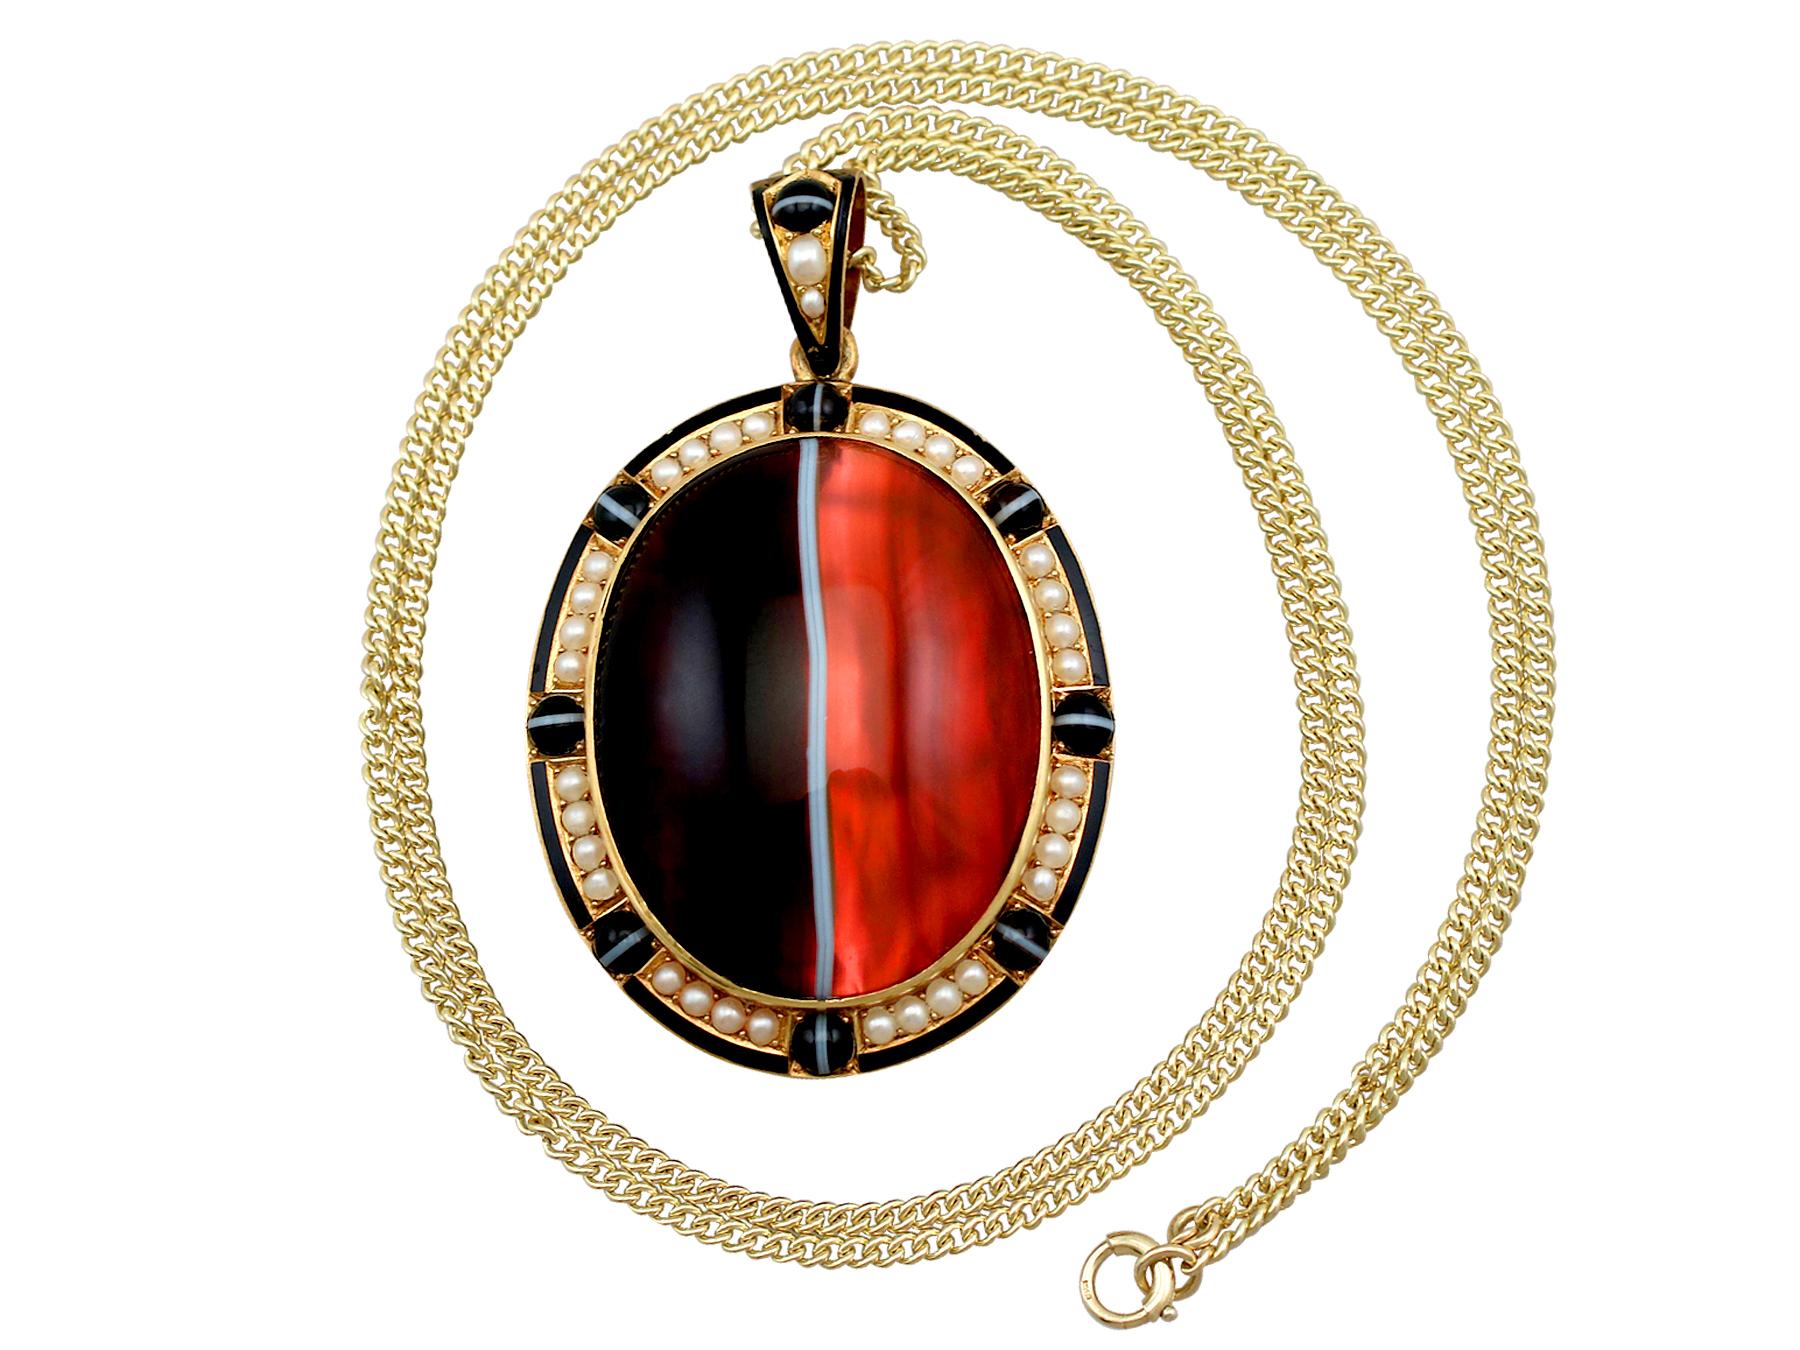 A stunning antique Victorian banded agate and seed pear, 18 karat yellow gold locket and chain; part of our diverse antique jewelry and estate jewelry collections.

This stunning, fine and impressive antique pearl and agate locket has been crafted